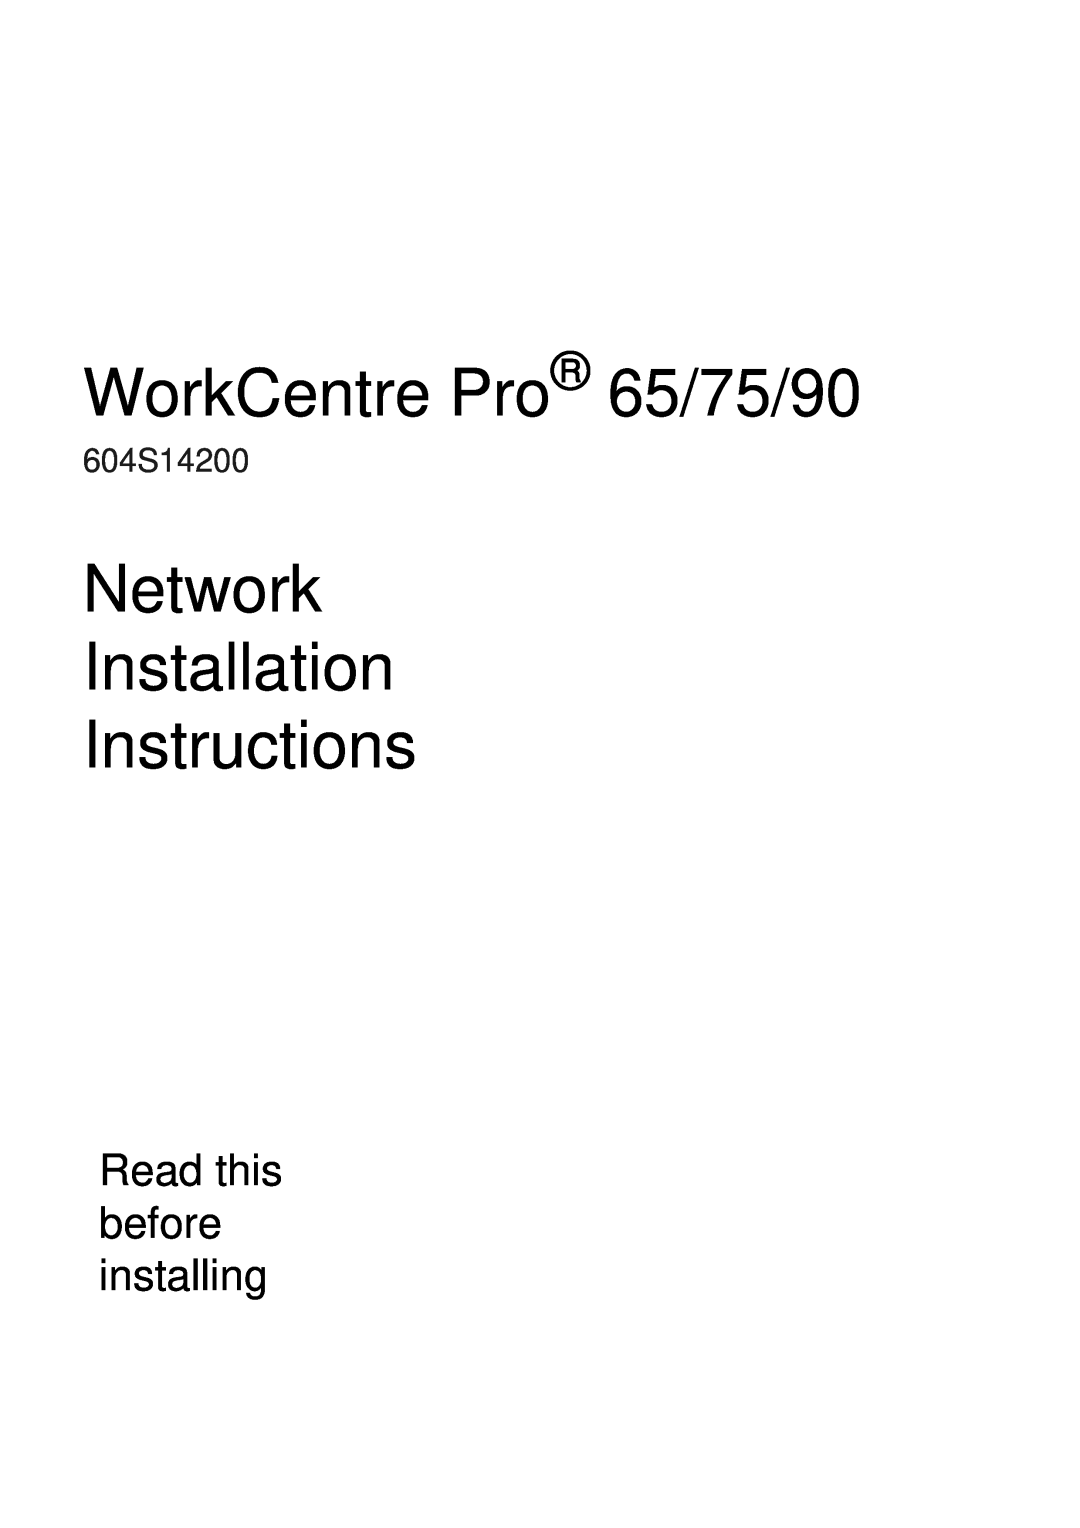 Xerox 604S14200 installation instructions WorkCentre Pro 65/75/90, Network Installation Instructions 